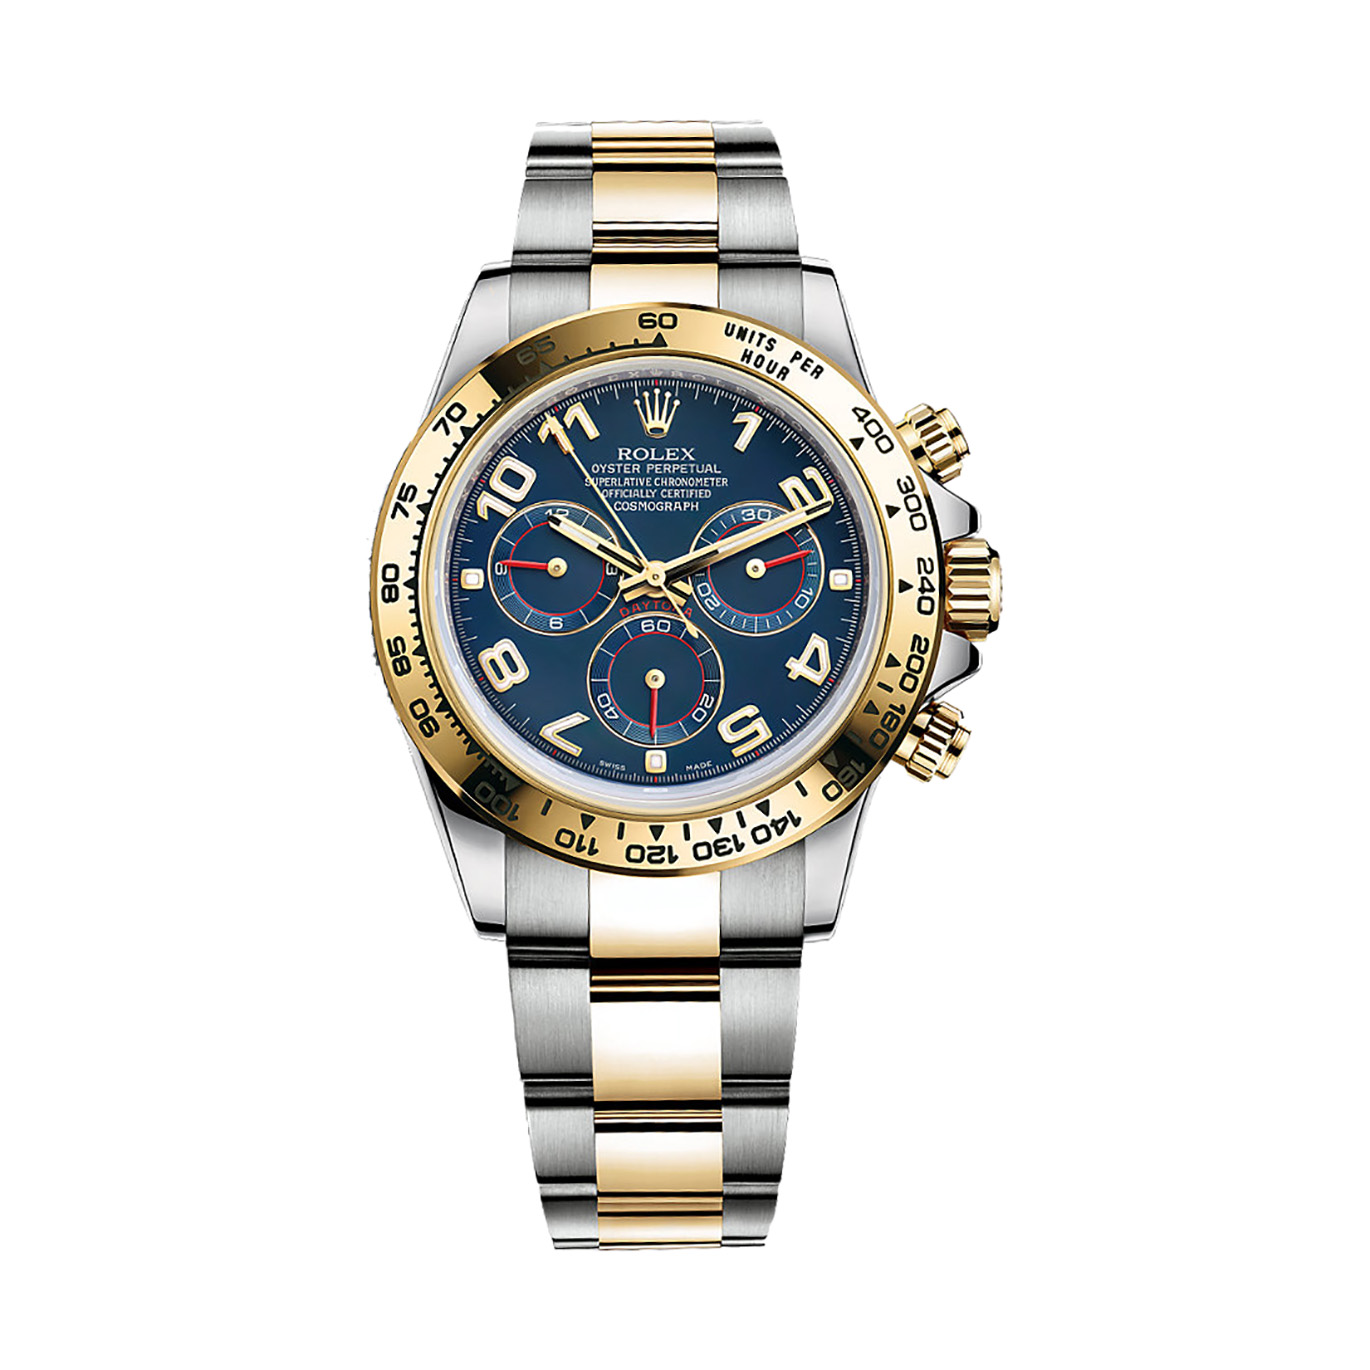 Cosmograph Daytona 116503 Gold & Stainless Steel Watch (Blue)